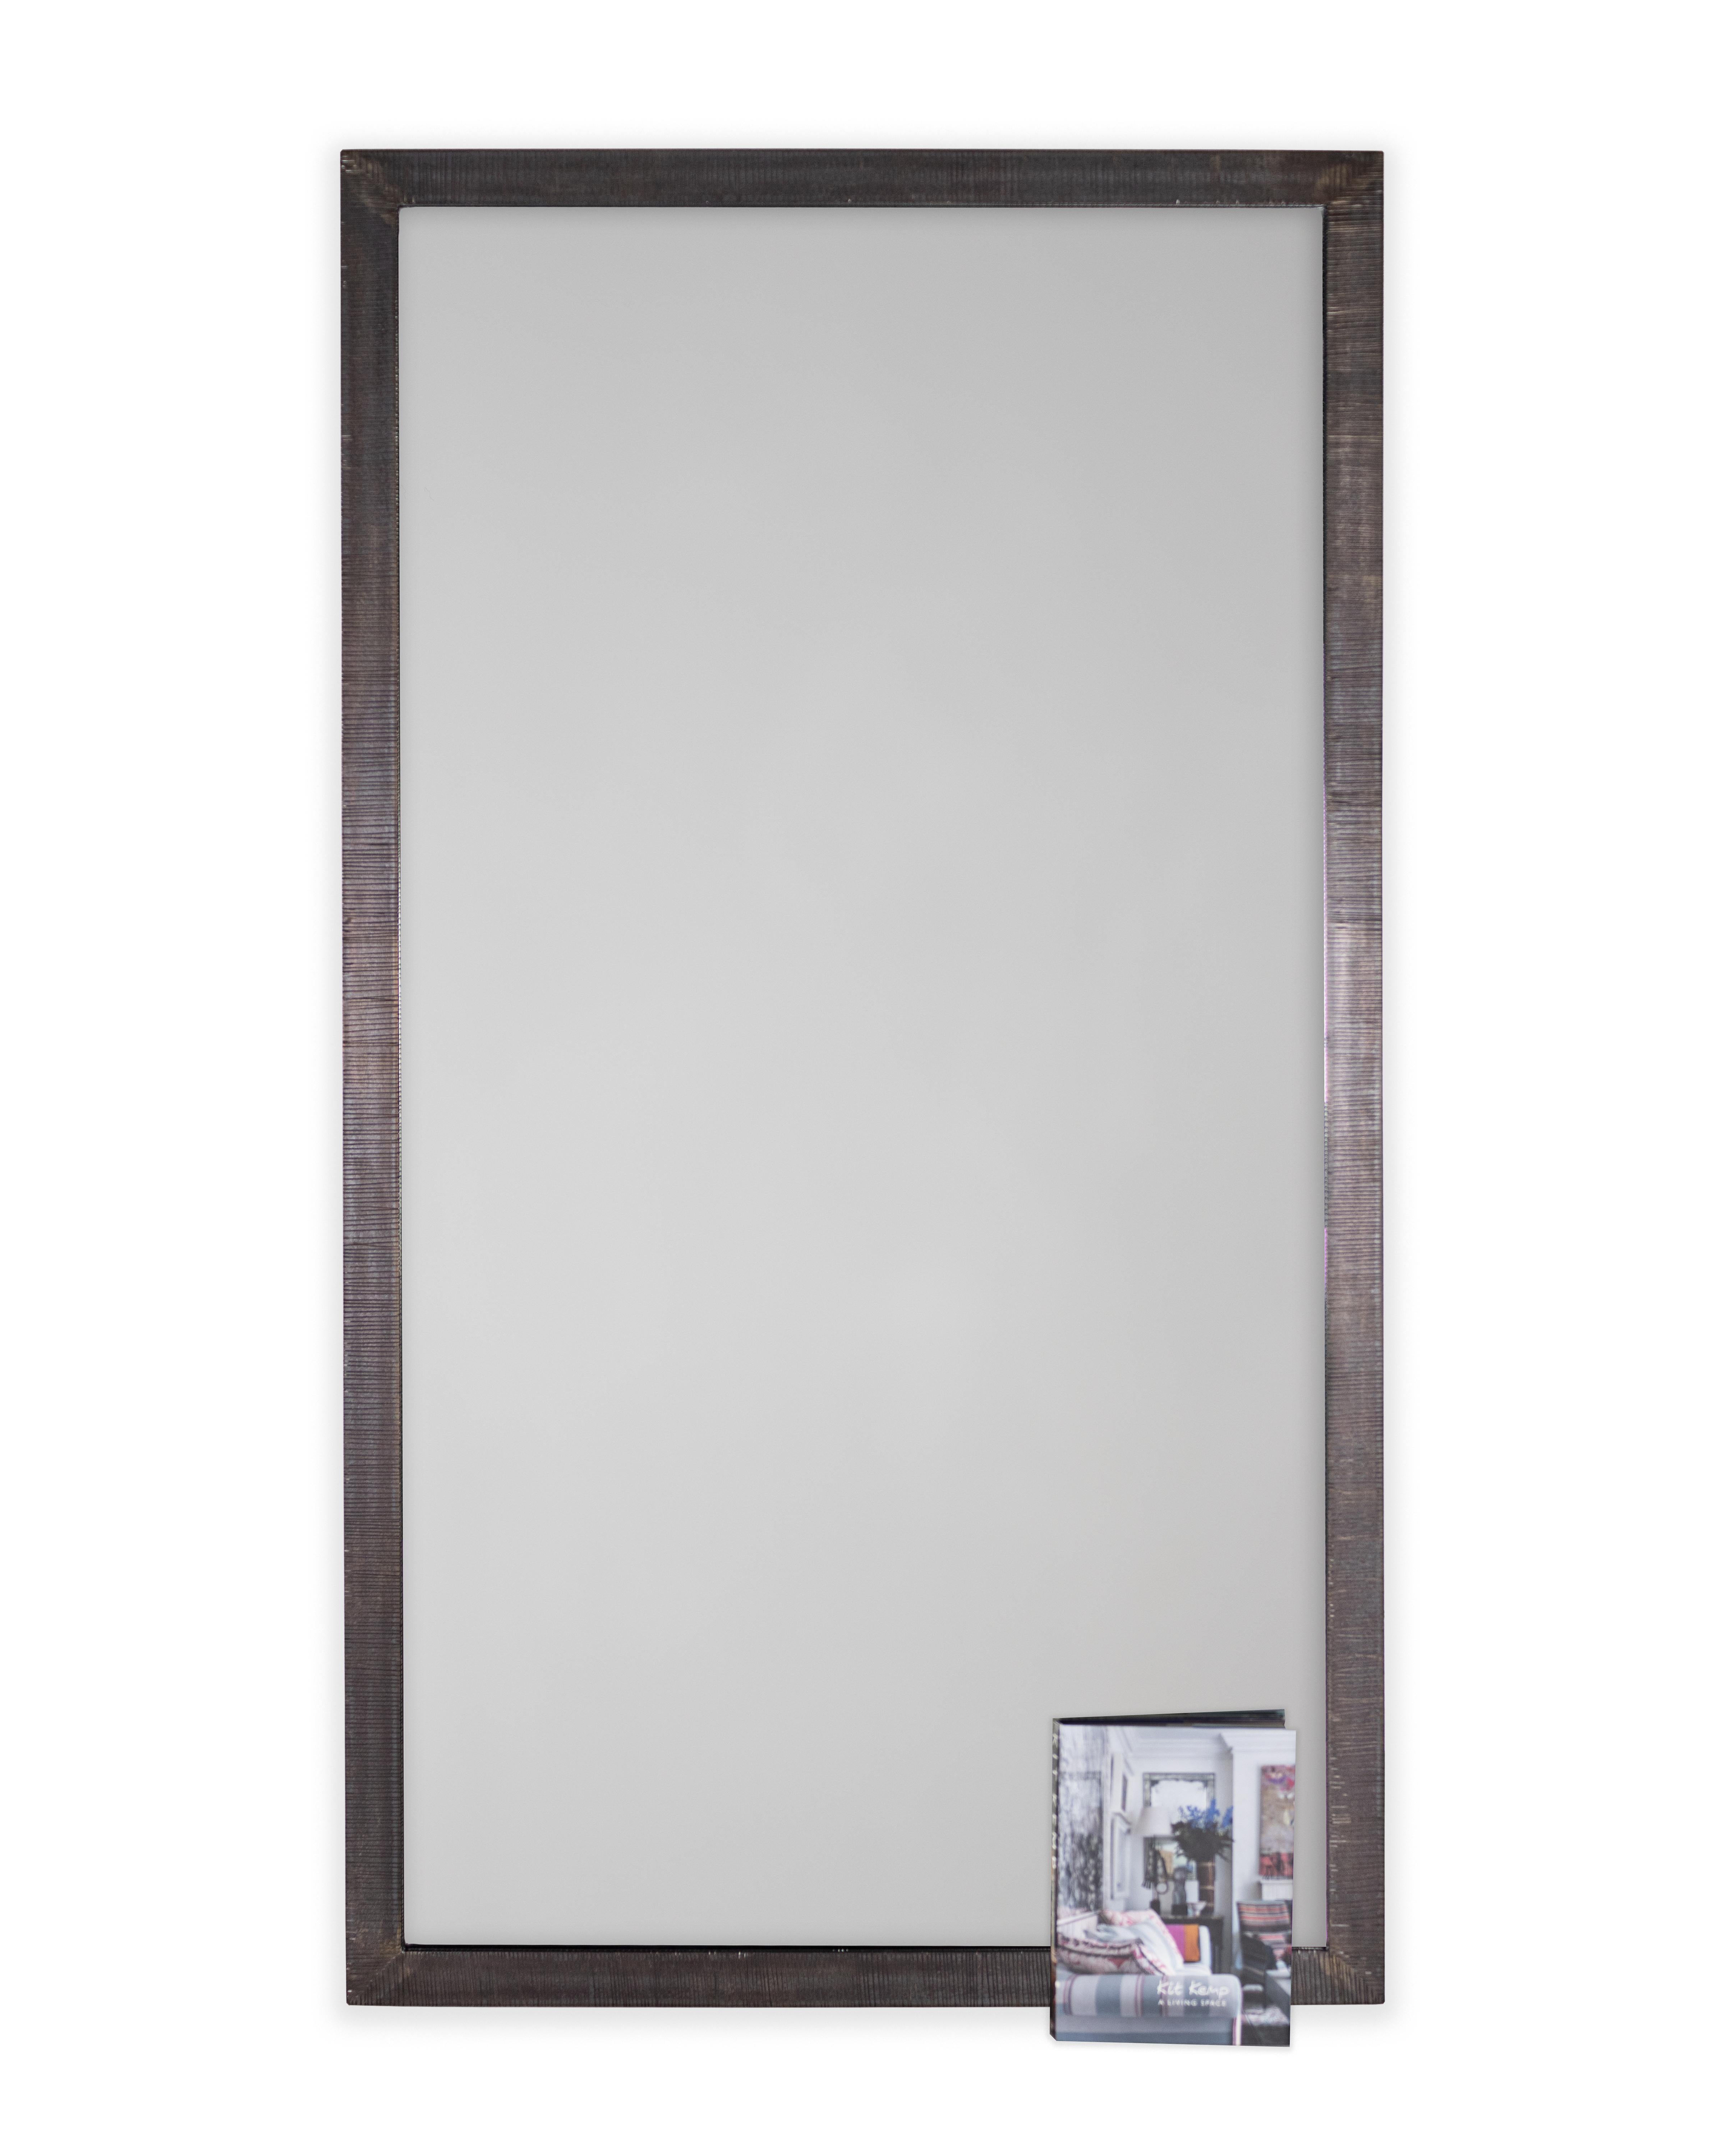 Strei Effect Hand Wrought Steel Mirror Frame In Good Condition For Sale In Dallas, TX